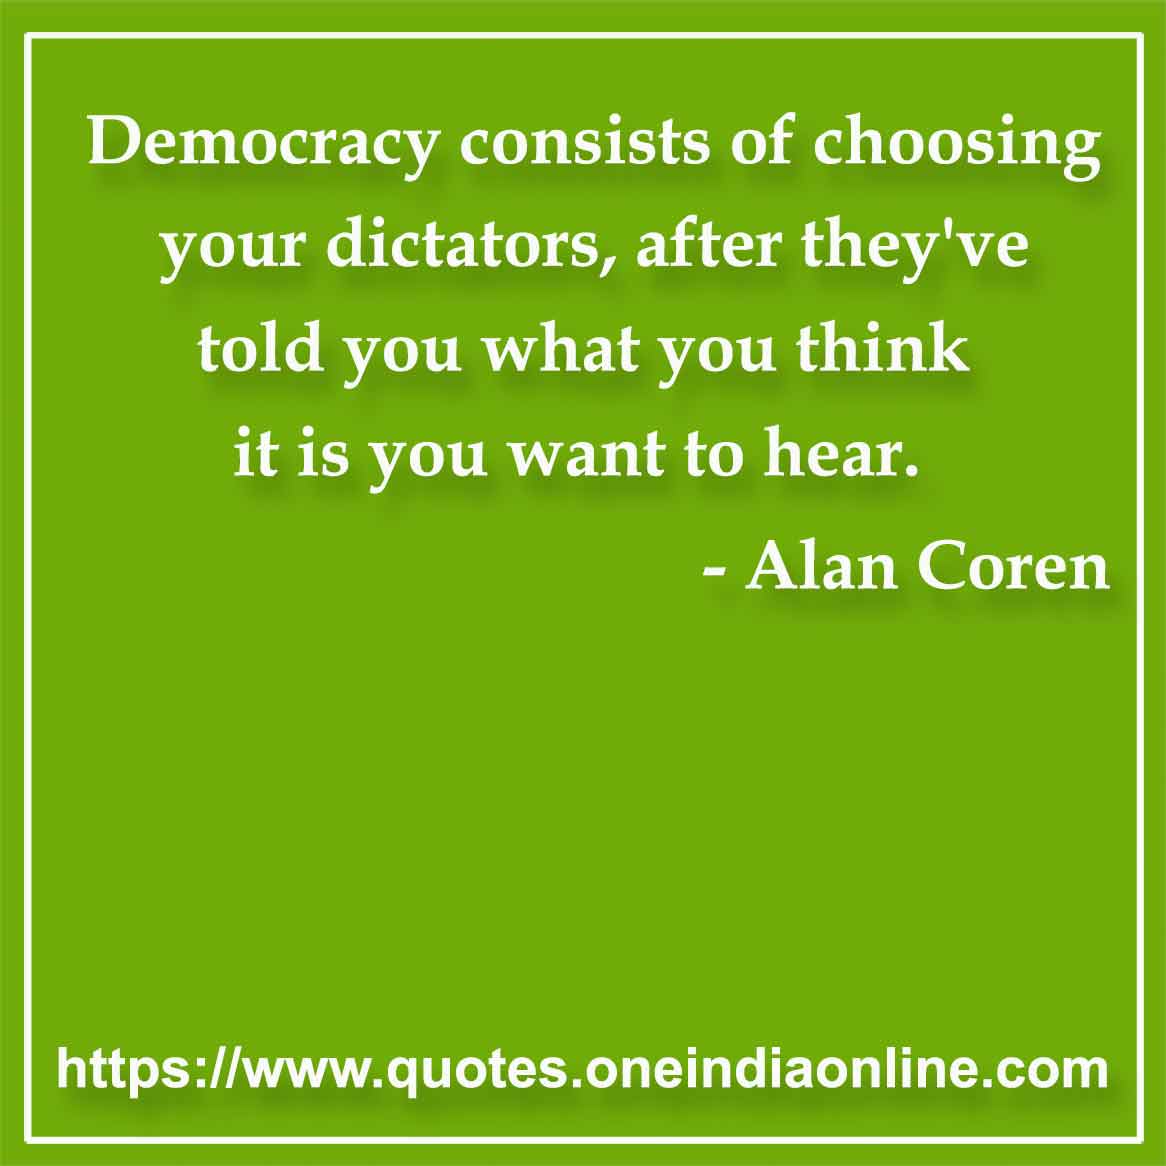 Democracy consists of choosing your dictators, after they've told you what you think it is you want to hear.

- Democracy Quotes by Alan Coren